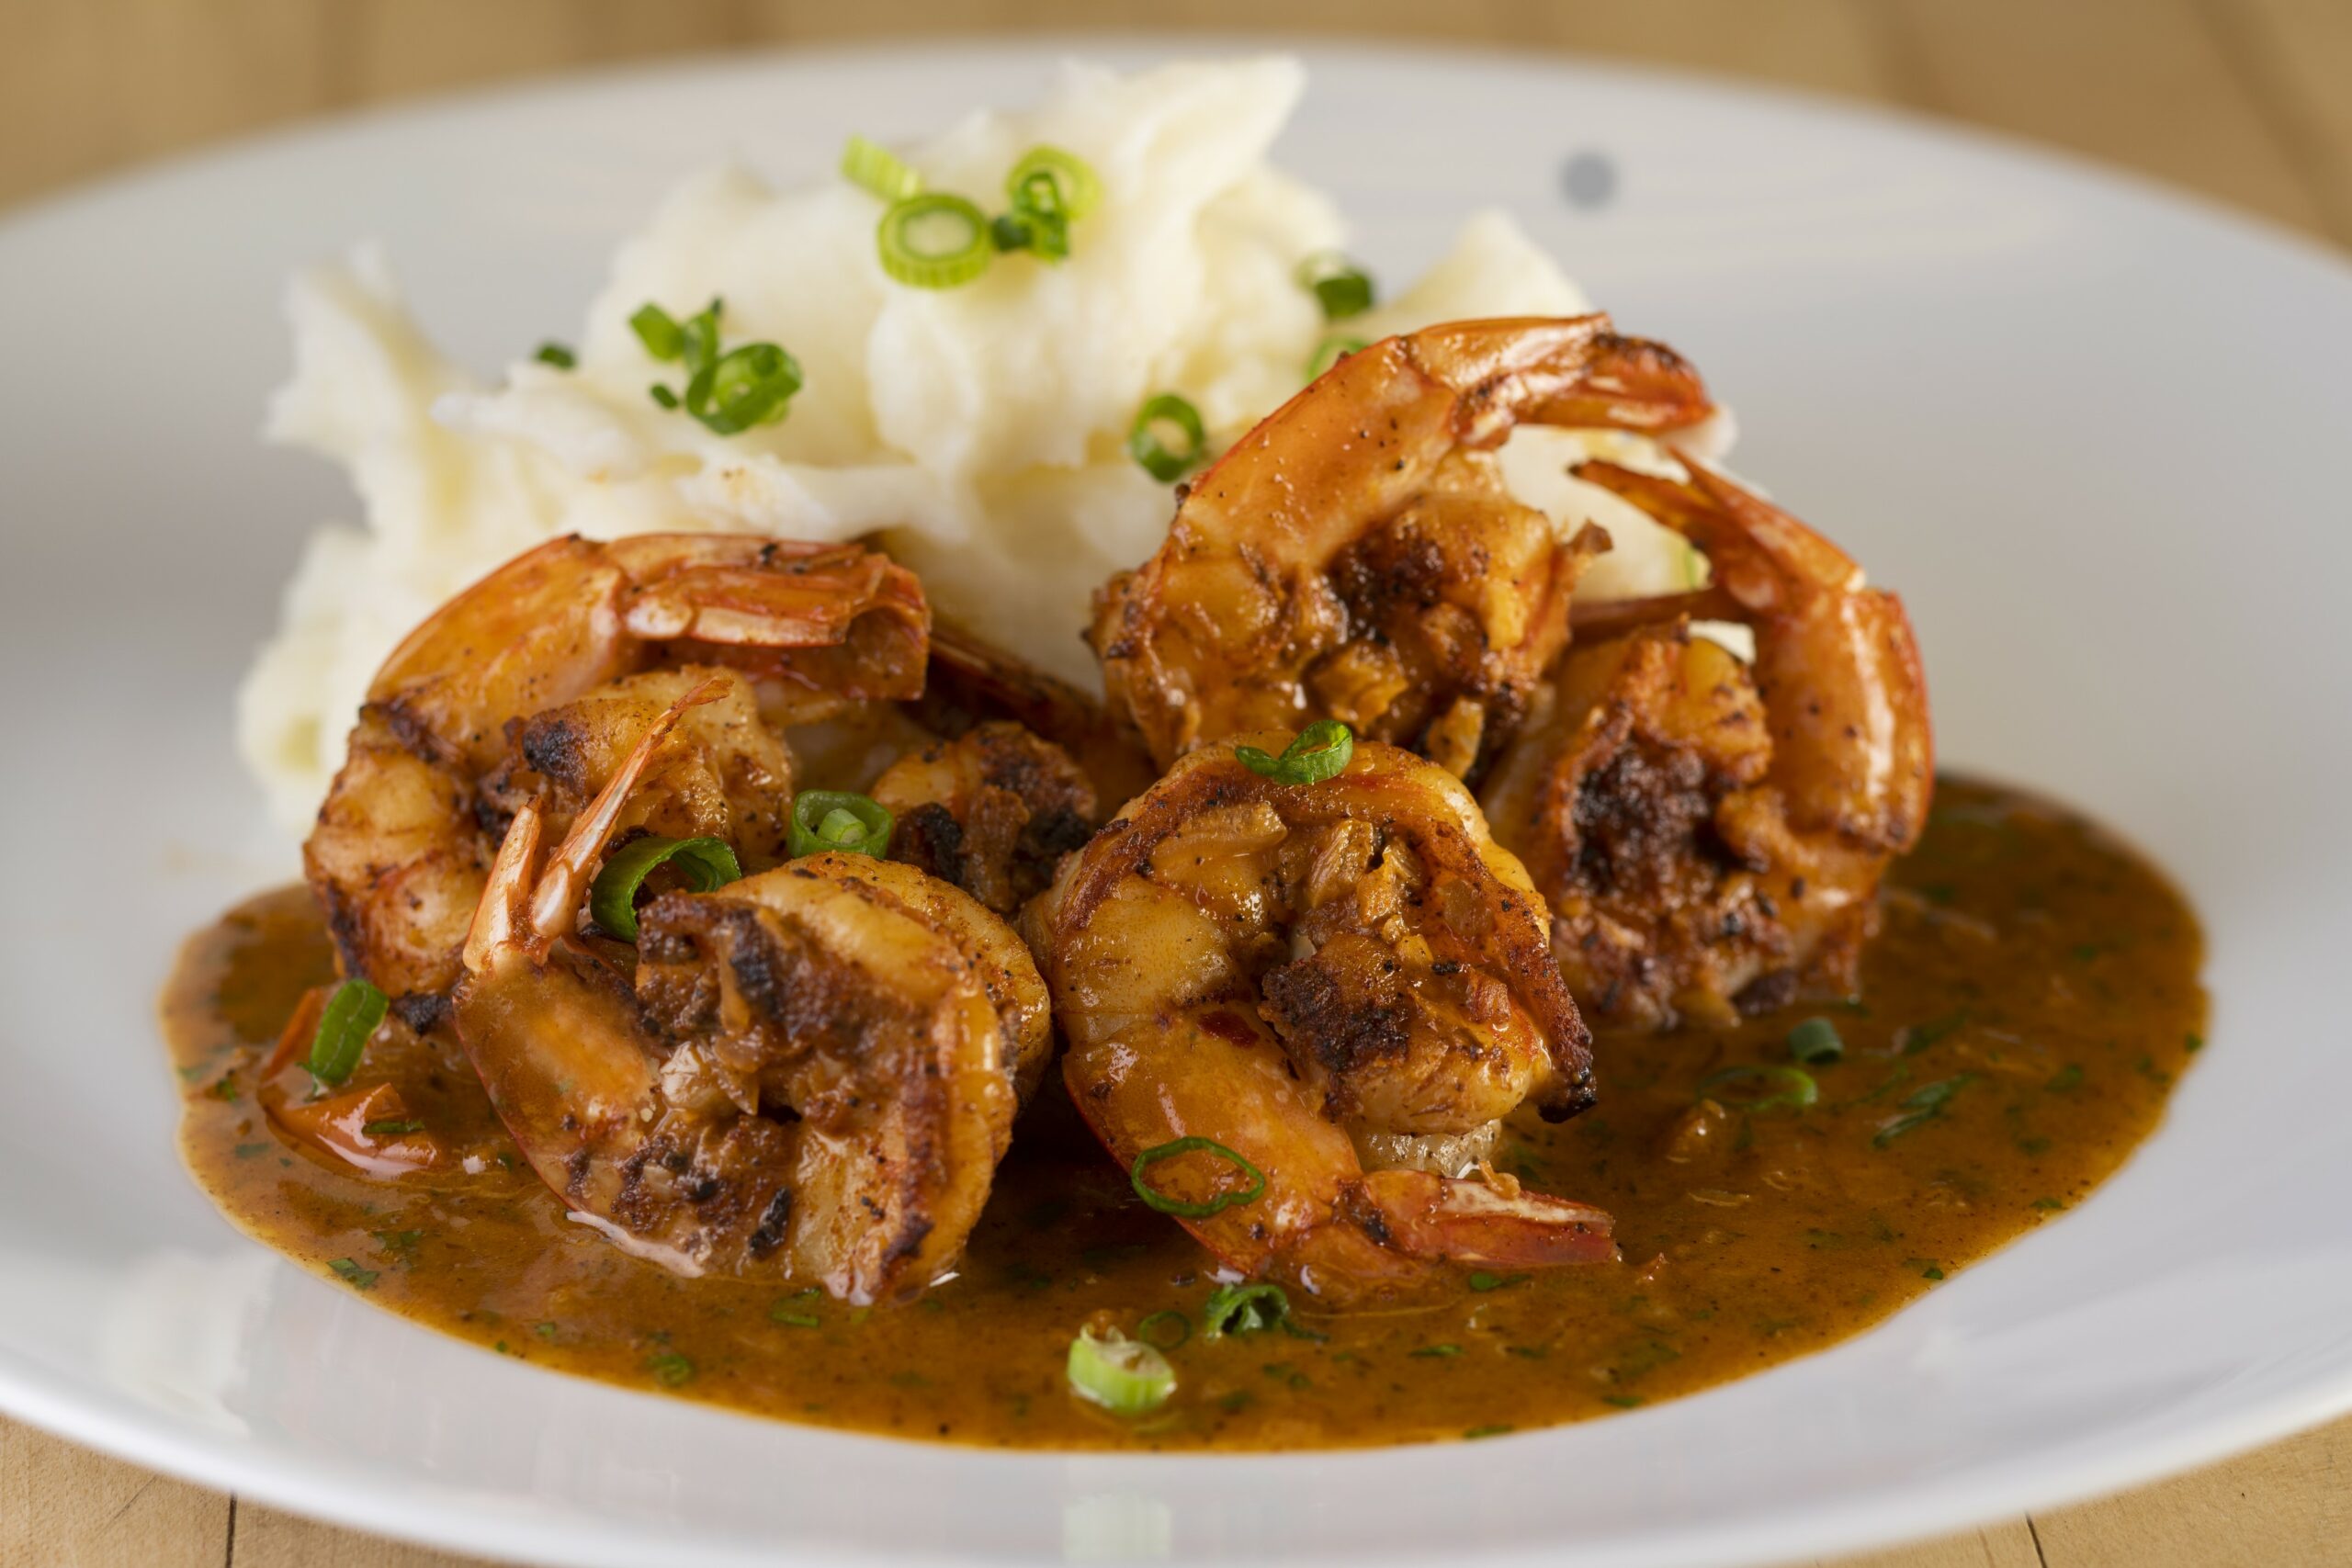 a close up of a plate of chipotle lemon shrimp and a side of mashed potatoes and green onions